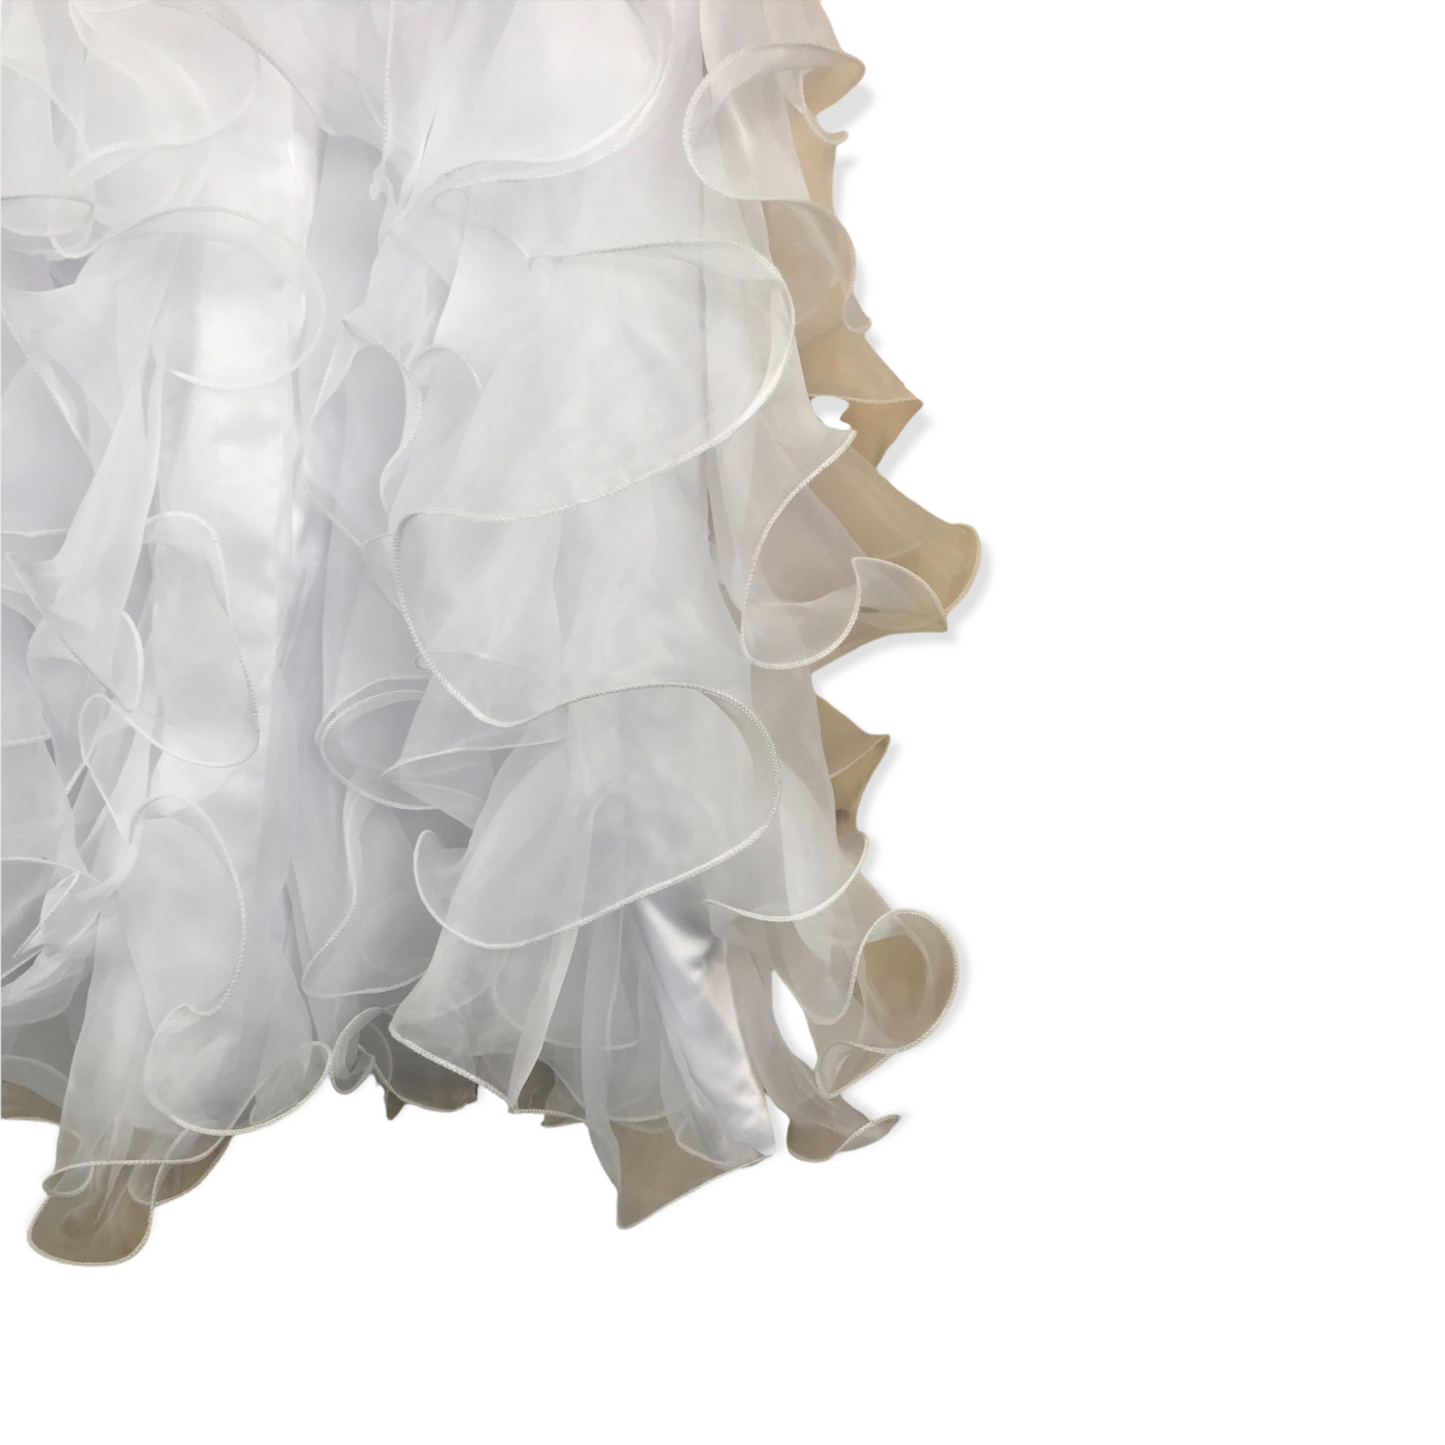 JJ's House White Tulle Layered Formal Dress Age 11